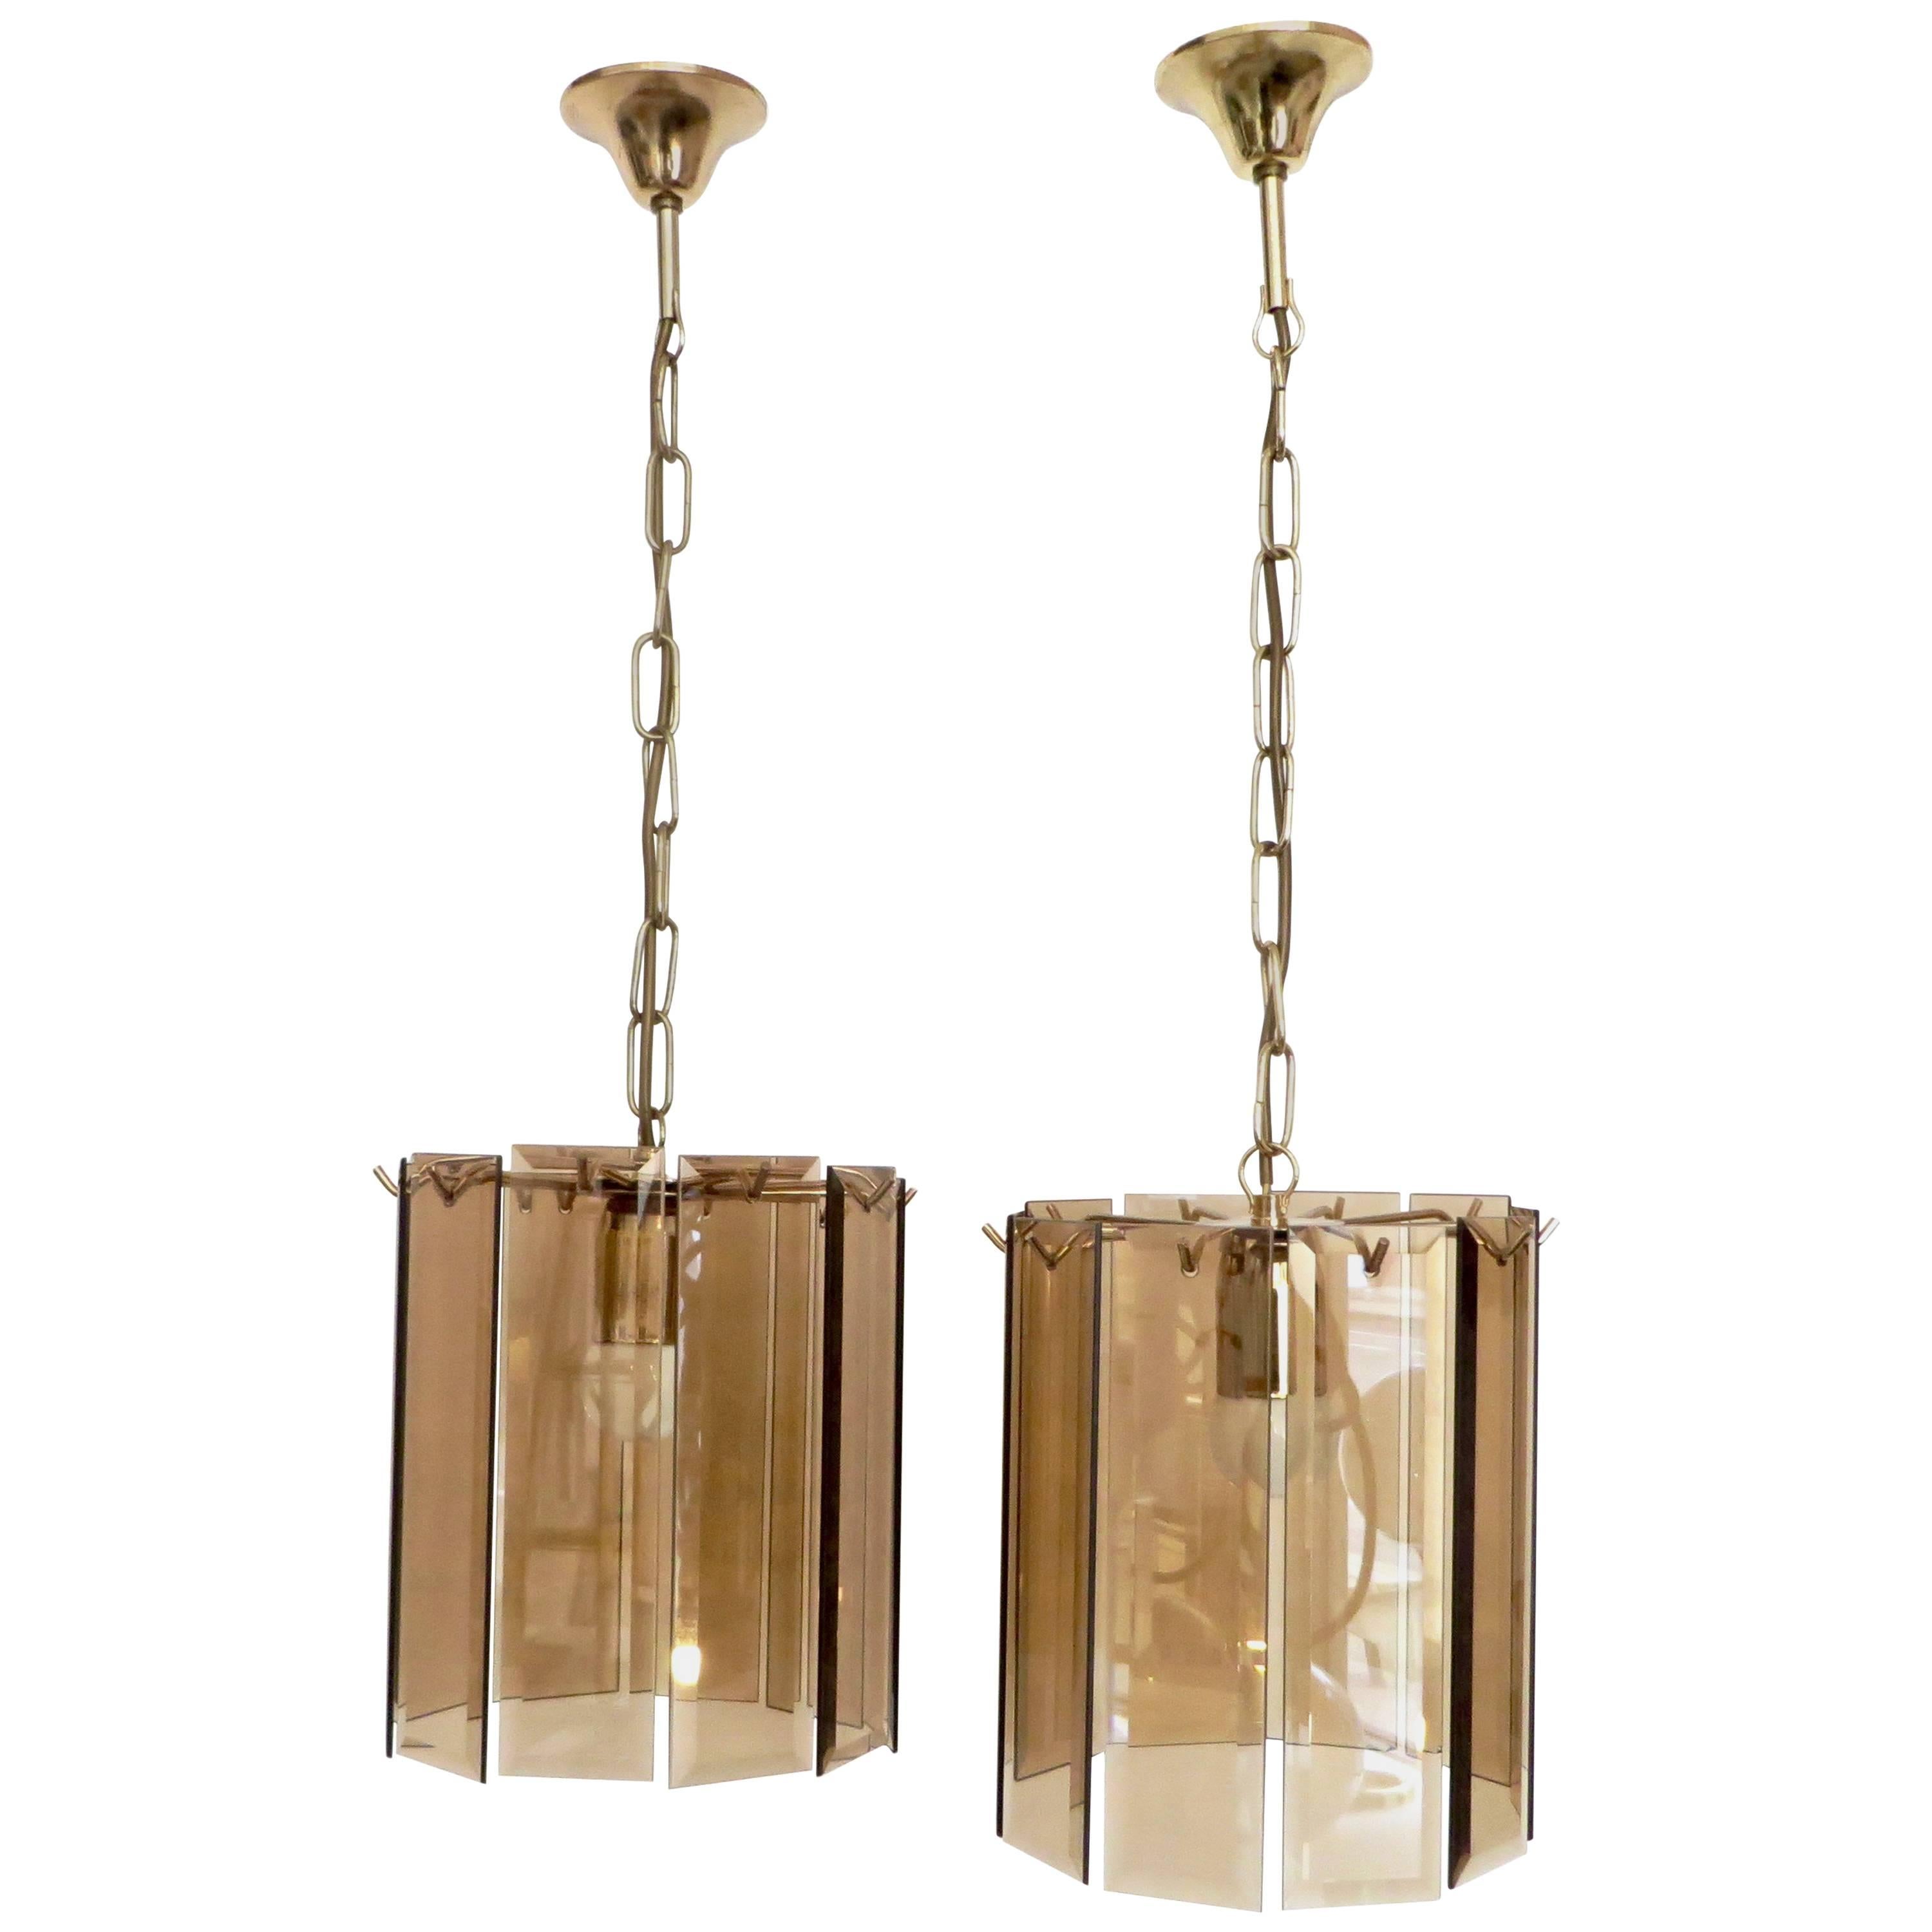 Pair of Amber Beveled Italian Glass Chandeliers with Brass Details